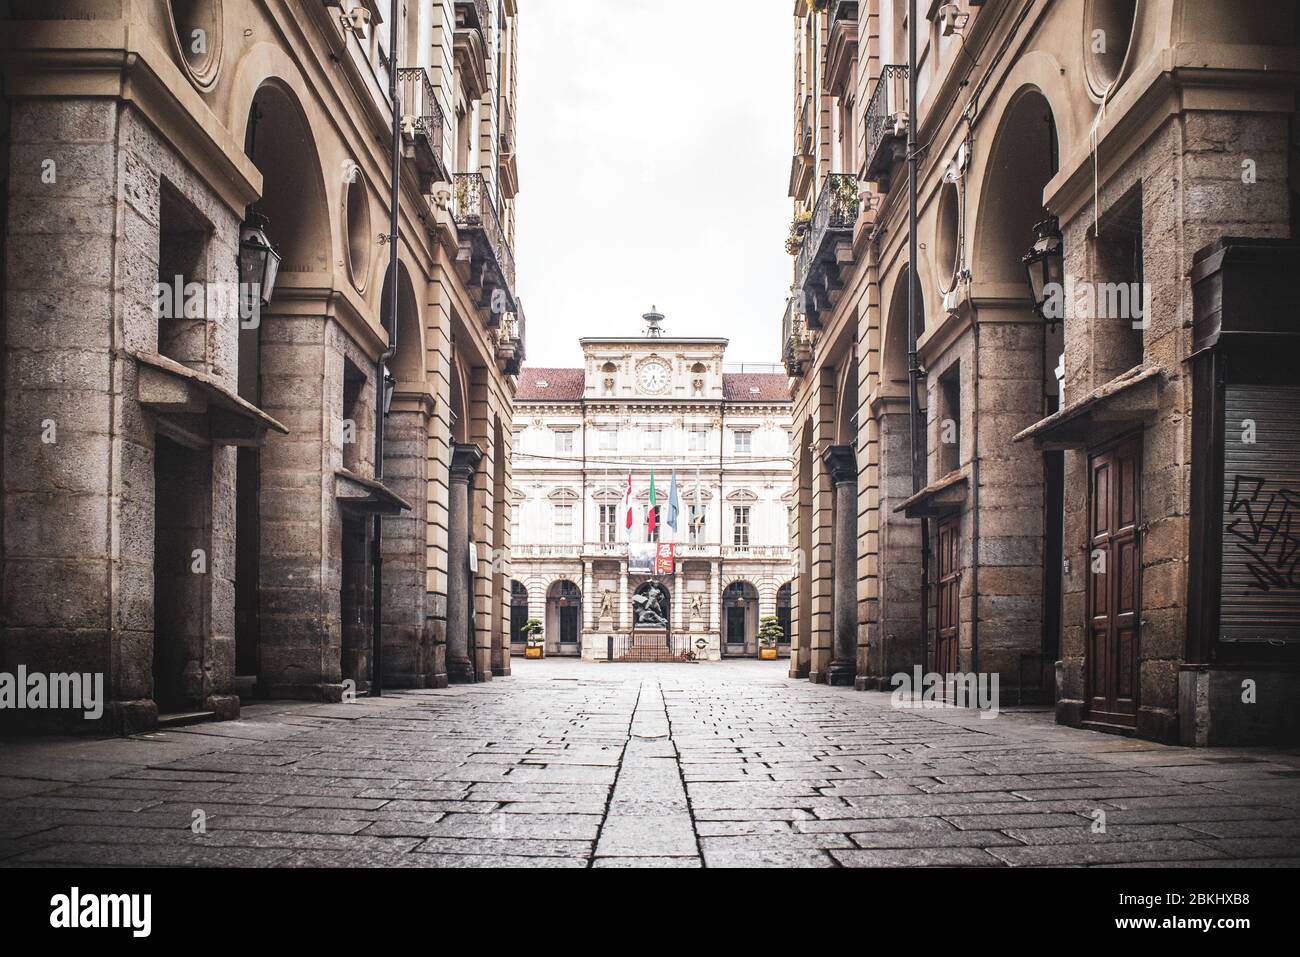 Torino, Italy. 26th Apr, 2020. Turin, Italy, April 2020: The facade of Palazzo di Città, head office of the Municipality of Torino during the Covid-19 pandemic lockdown period (Photo by Alessandro Bosio/Pacific Press) Credit: Pacific Press Agency/Alamy Live News Stock Photo